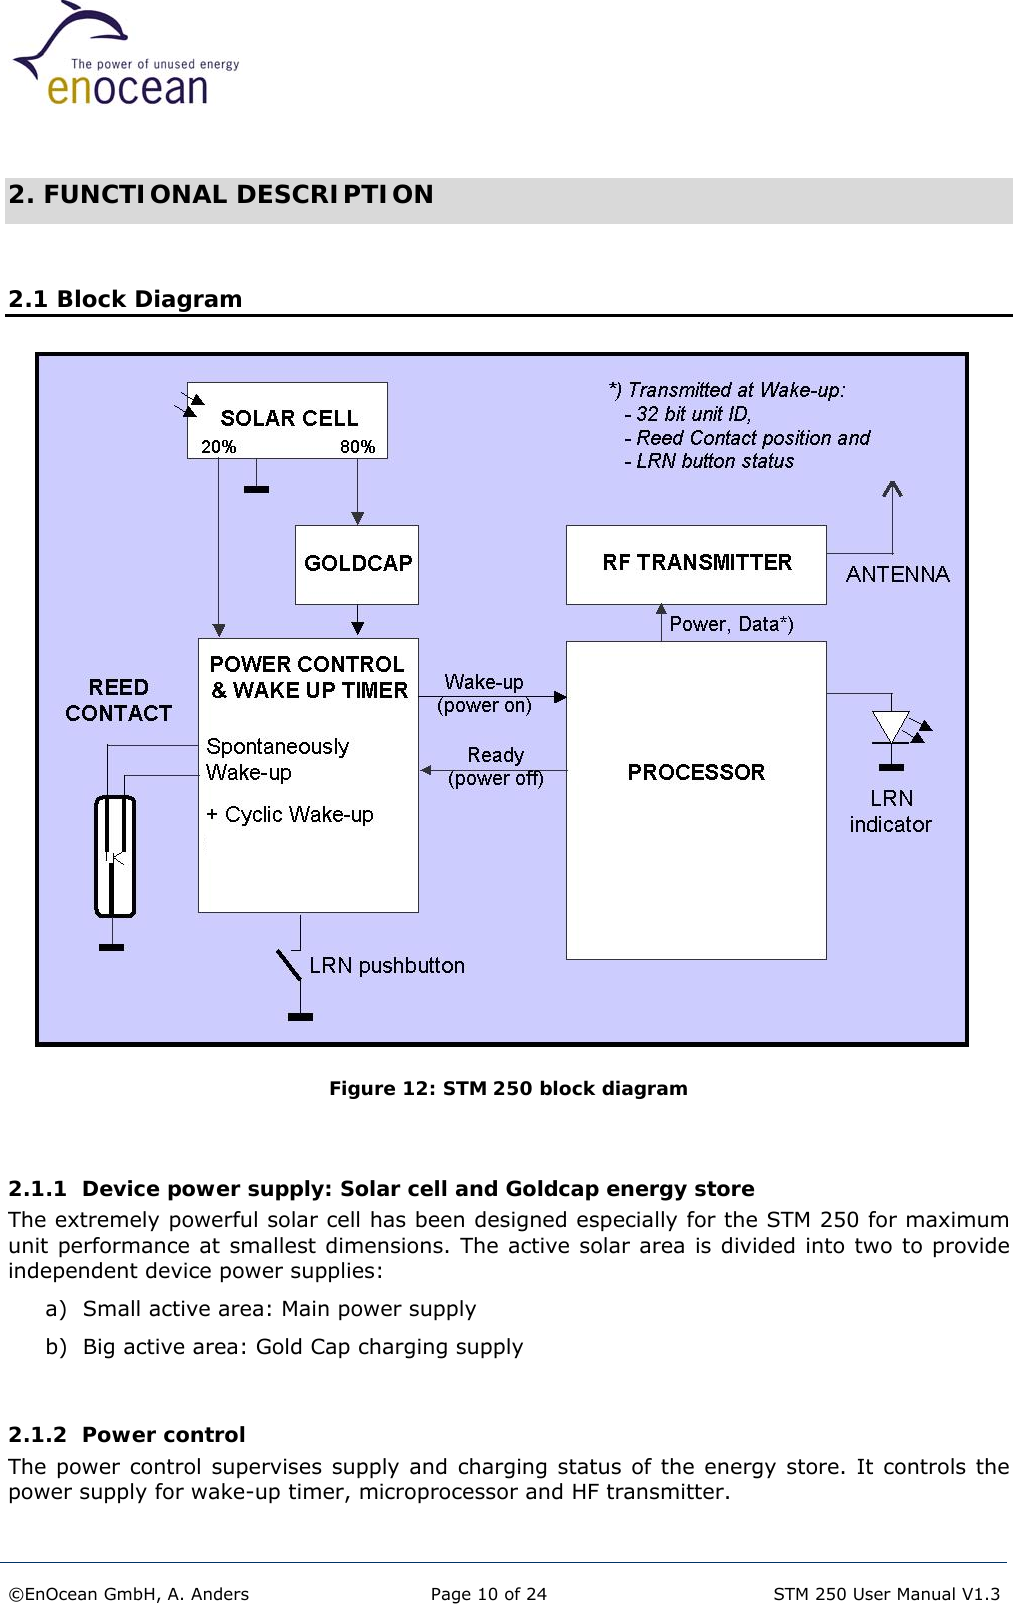   2. FUNCTIONAL DESCRIPTION  2.1 Block Diagram                                  Figure 12: STM 250 block diagram    2.1.1  Device power supply: Solar cell and Goldcap energy store The extremely powerful solar cell has been designed especially for the STM 250 for maximum unit performance at smallest dimensions. The active solar area is divided into two to provide independent device power supplies: a)  Small active area: Main power supply b)  Big active area: Gold Cap charging supply   2.1.2  Power control The power control supervises supply and charging status of the energy store. It controls the power supply for wake-up timer, microprocessor and HF transmitter.   ©EnOcean GmbH, A. Anders  Page 10 of 24   STM 250 User Manual V1.3  